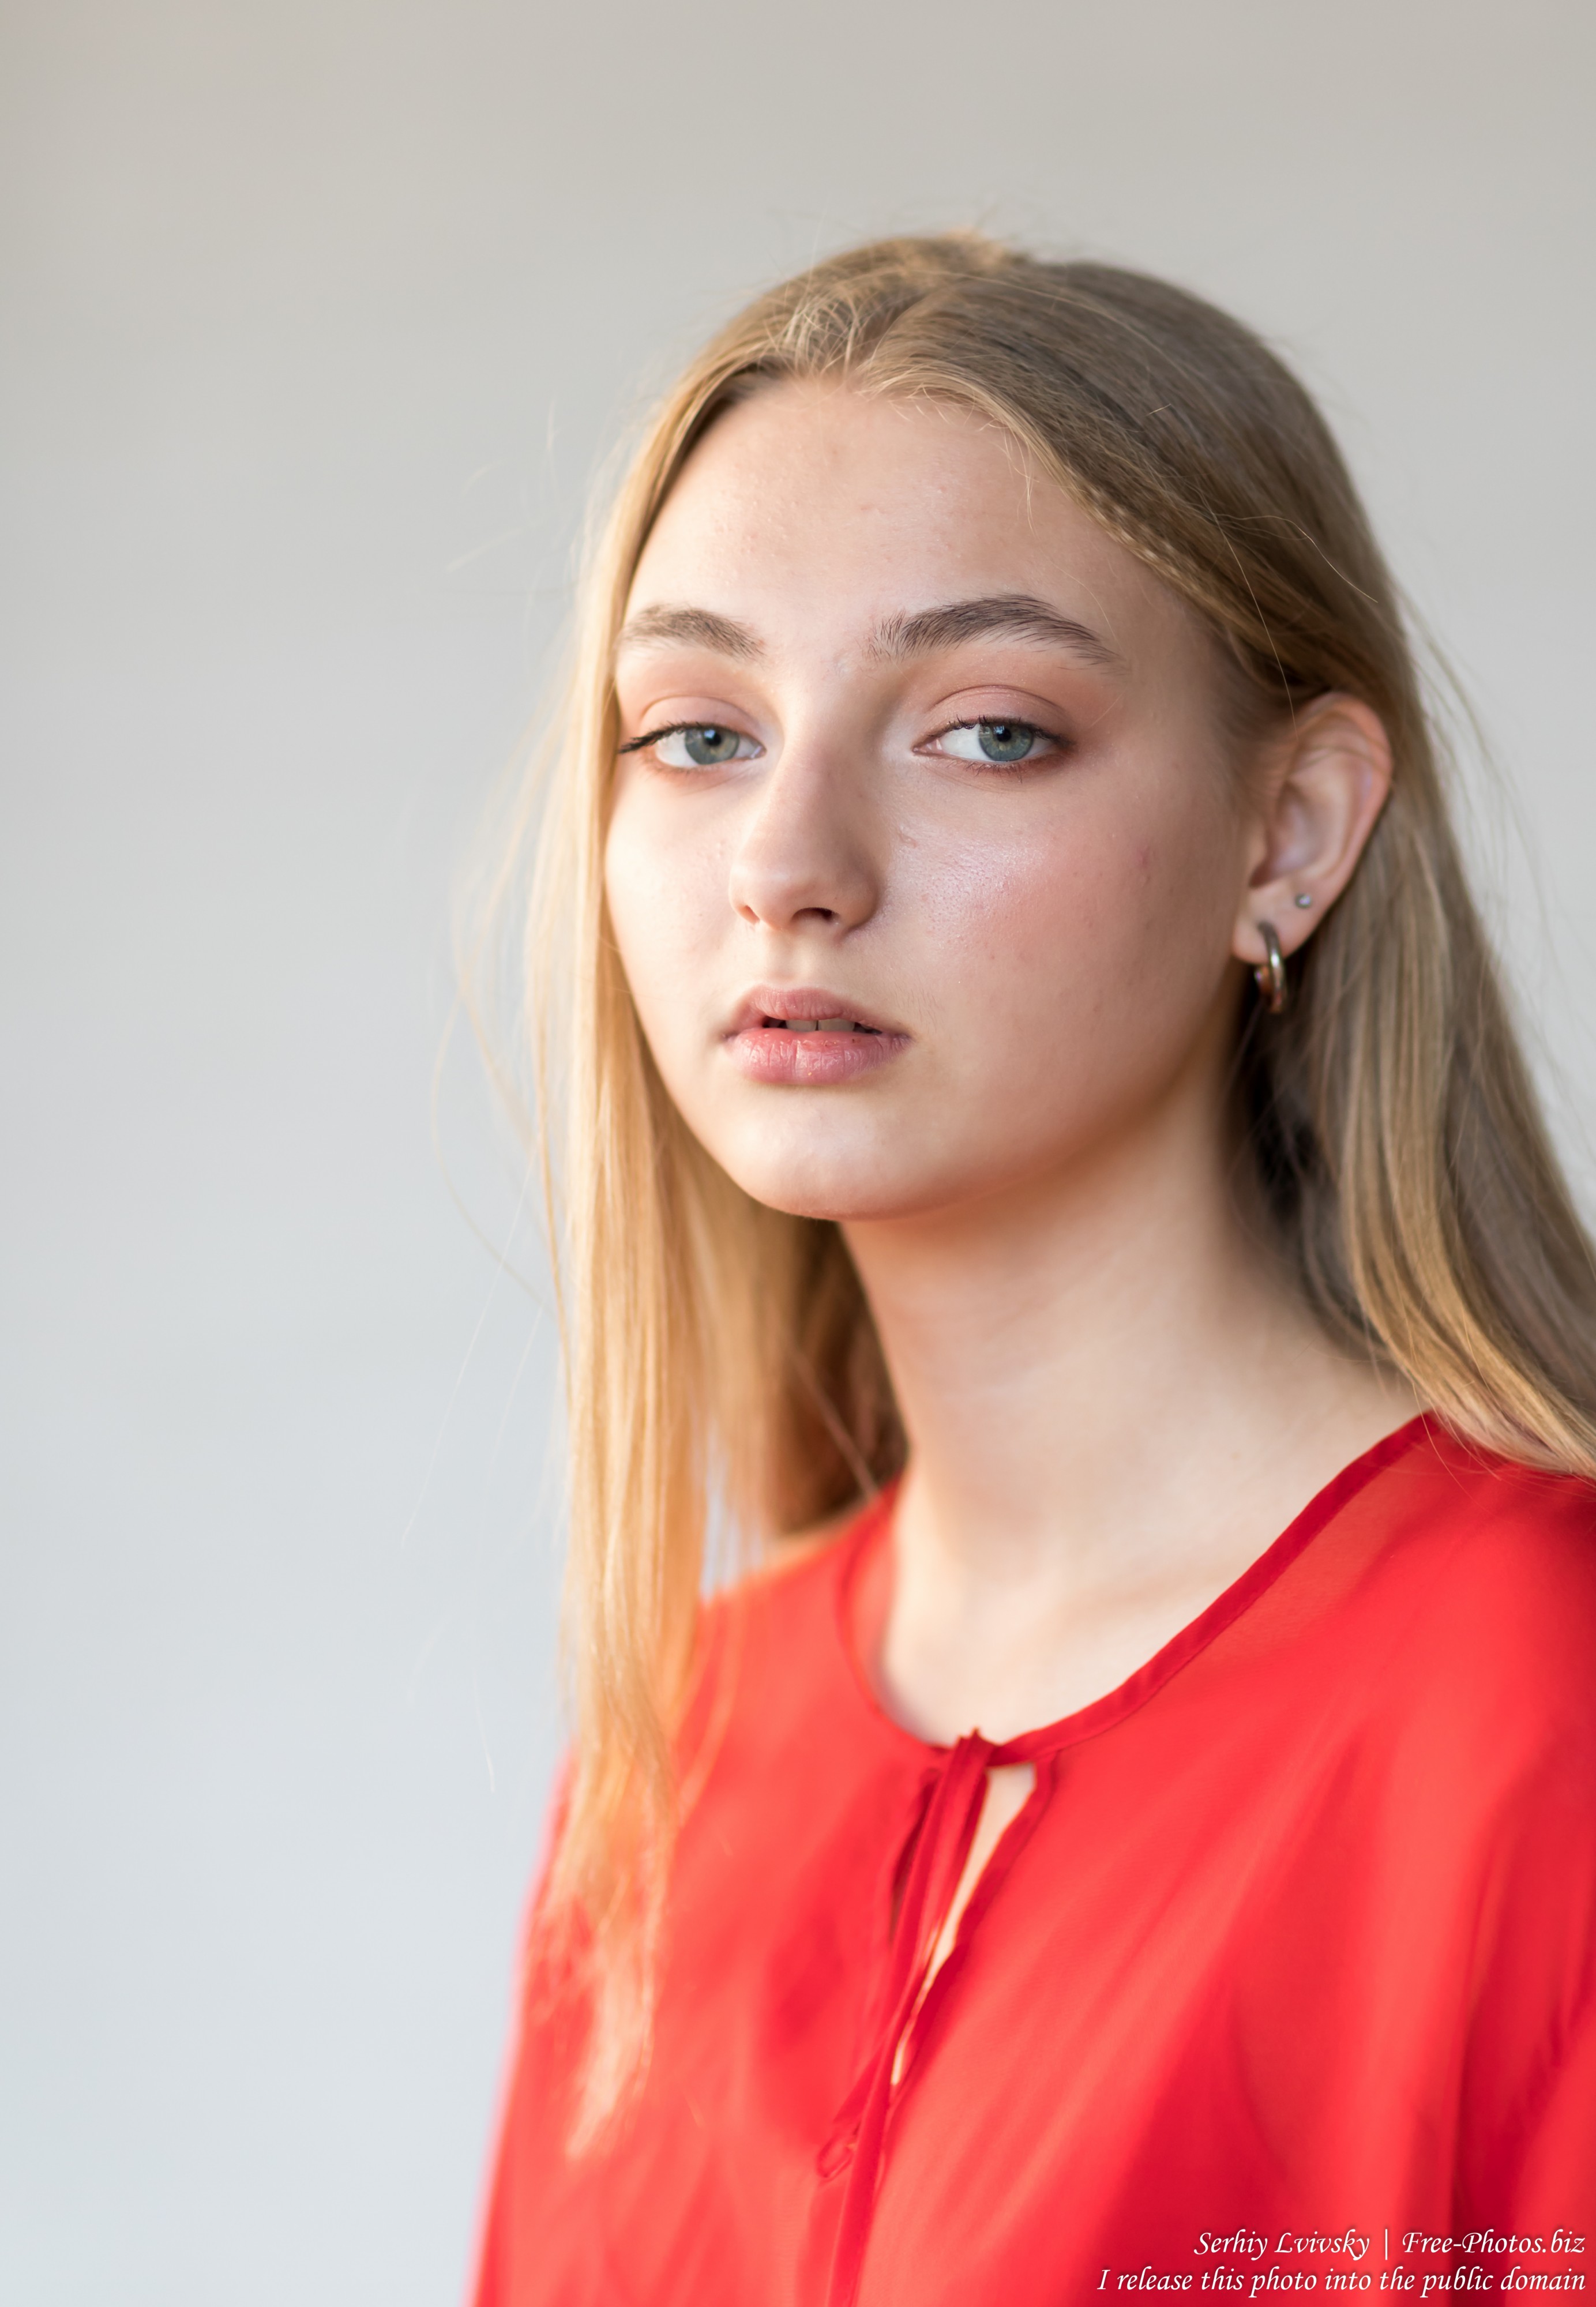 Nastia - a 16-year-old natural blonde girl photographed in September 2019 by Serhiy Lvivsky, picture 4